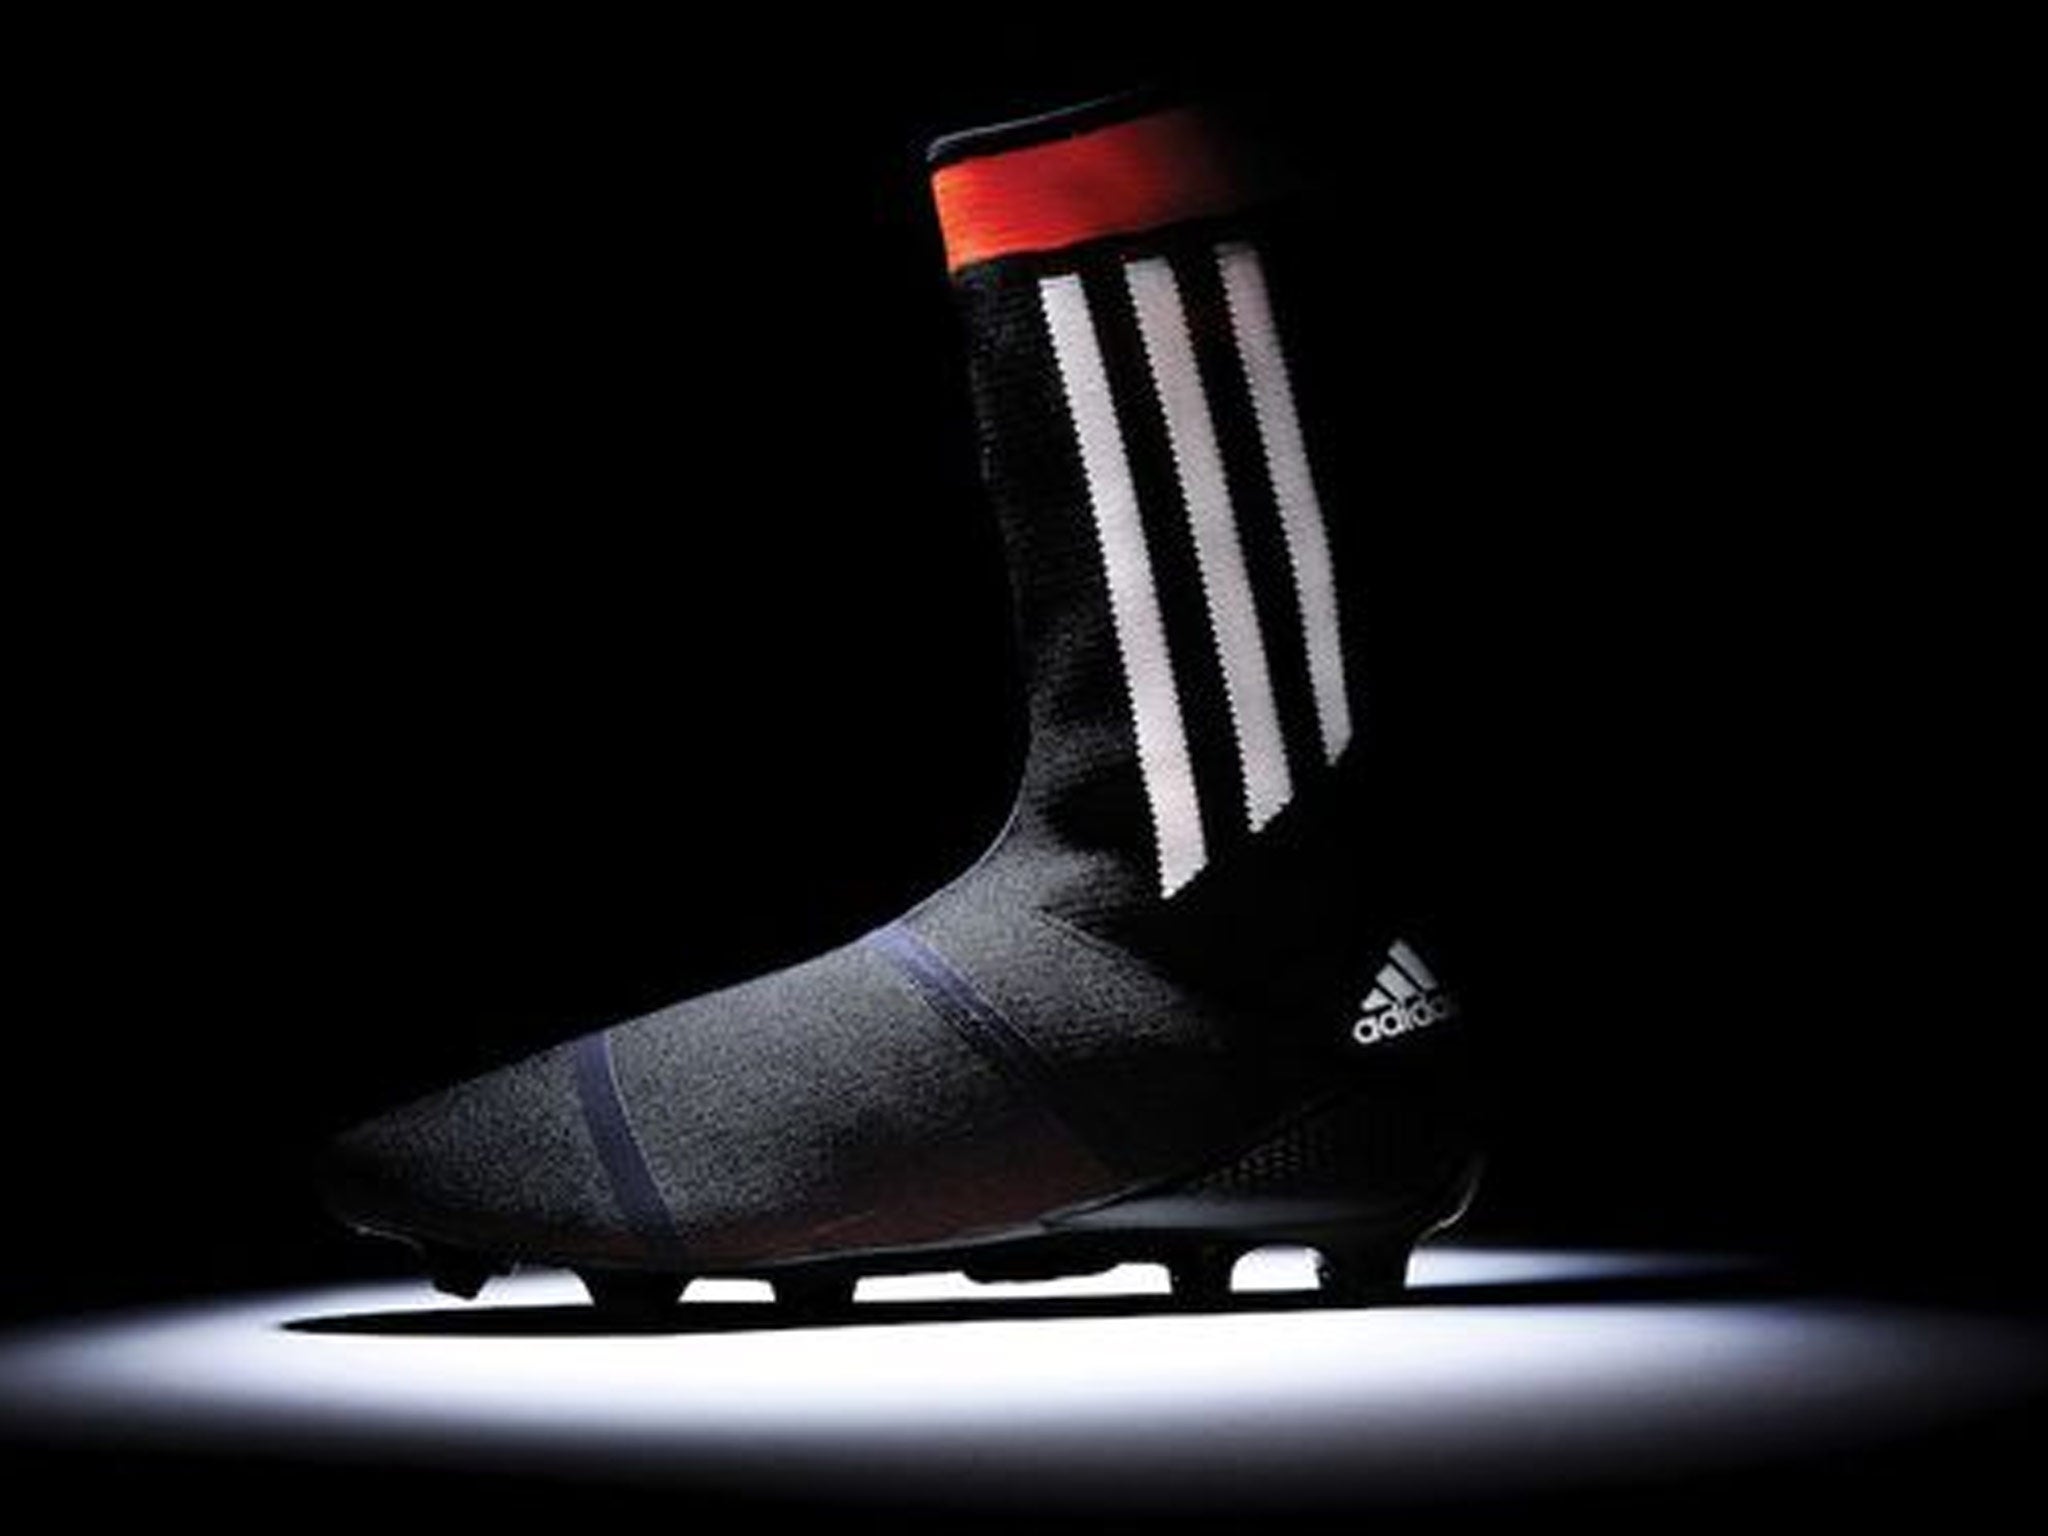 The adidas Primeknit FS - providing an all-in-one boot and sock